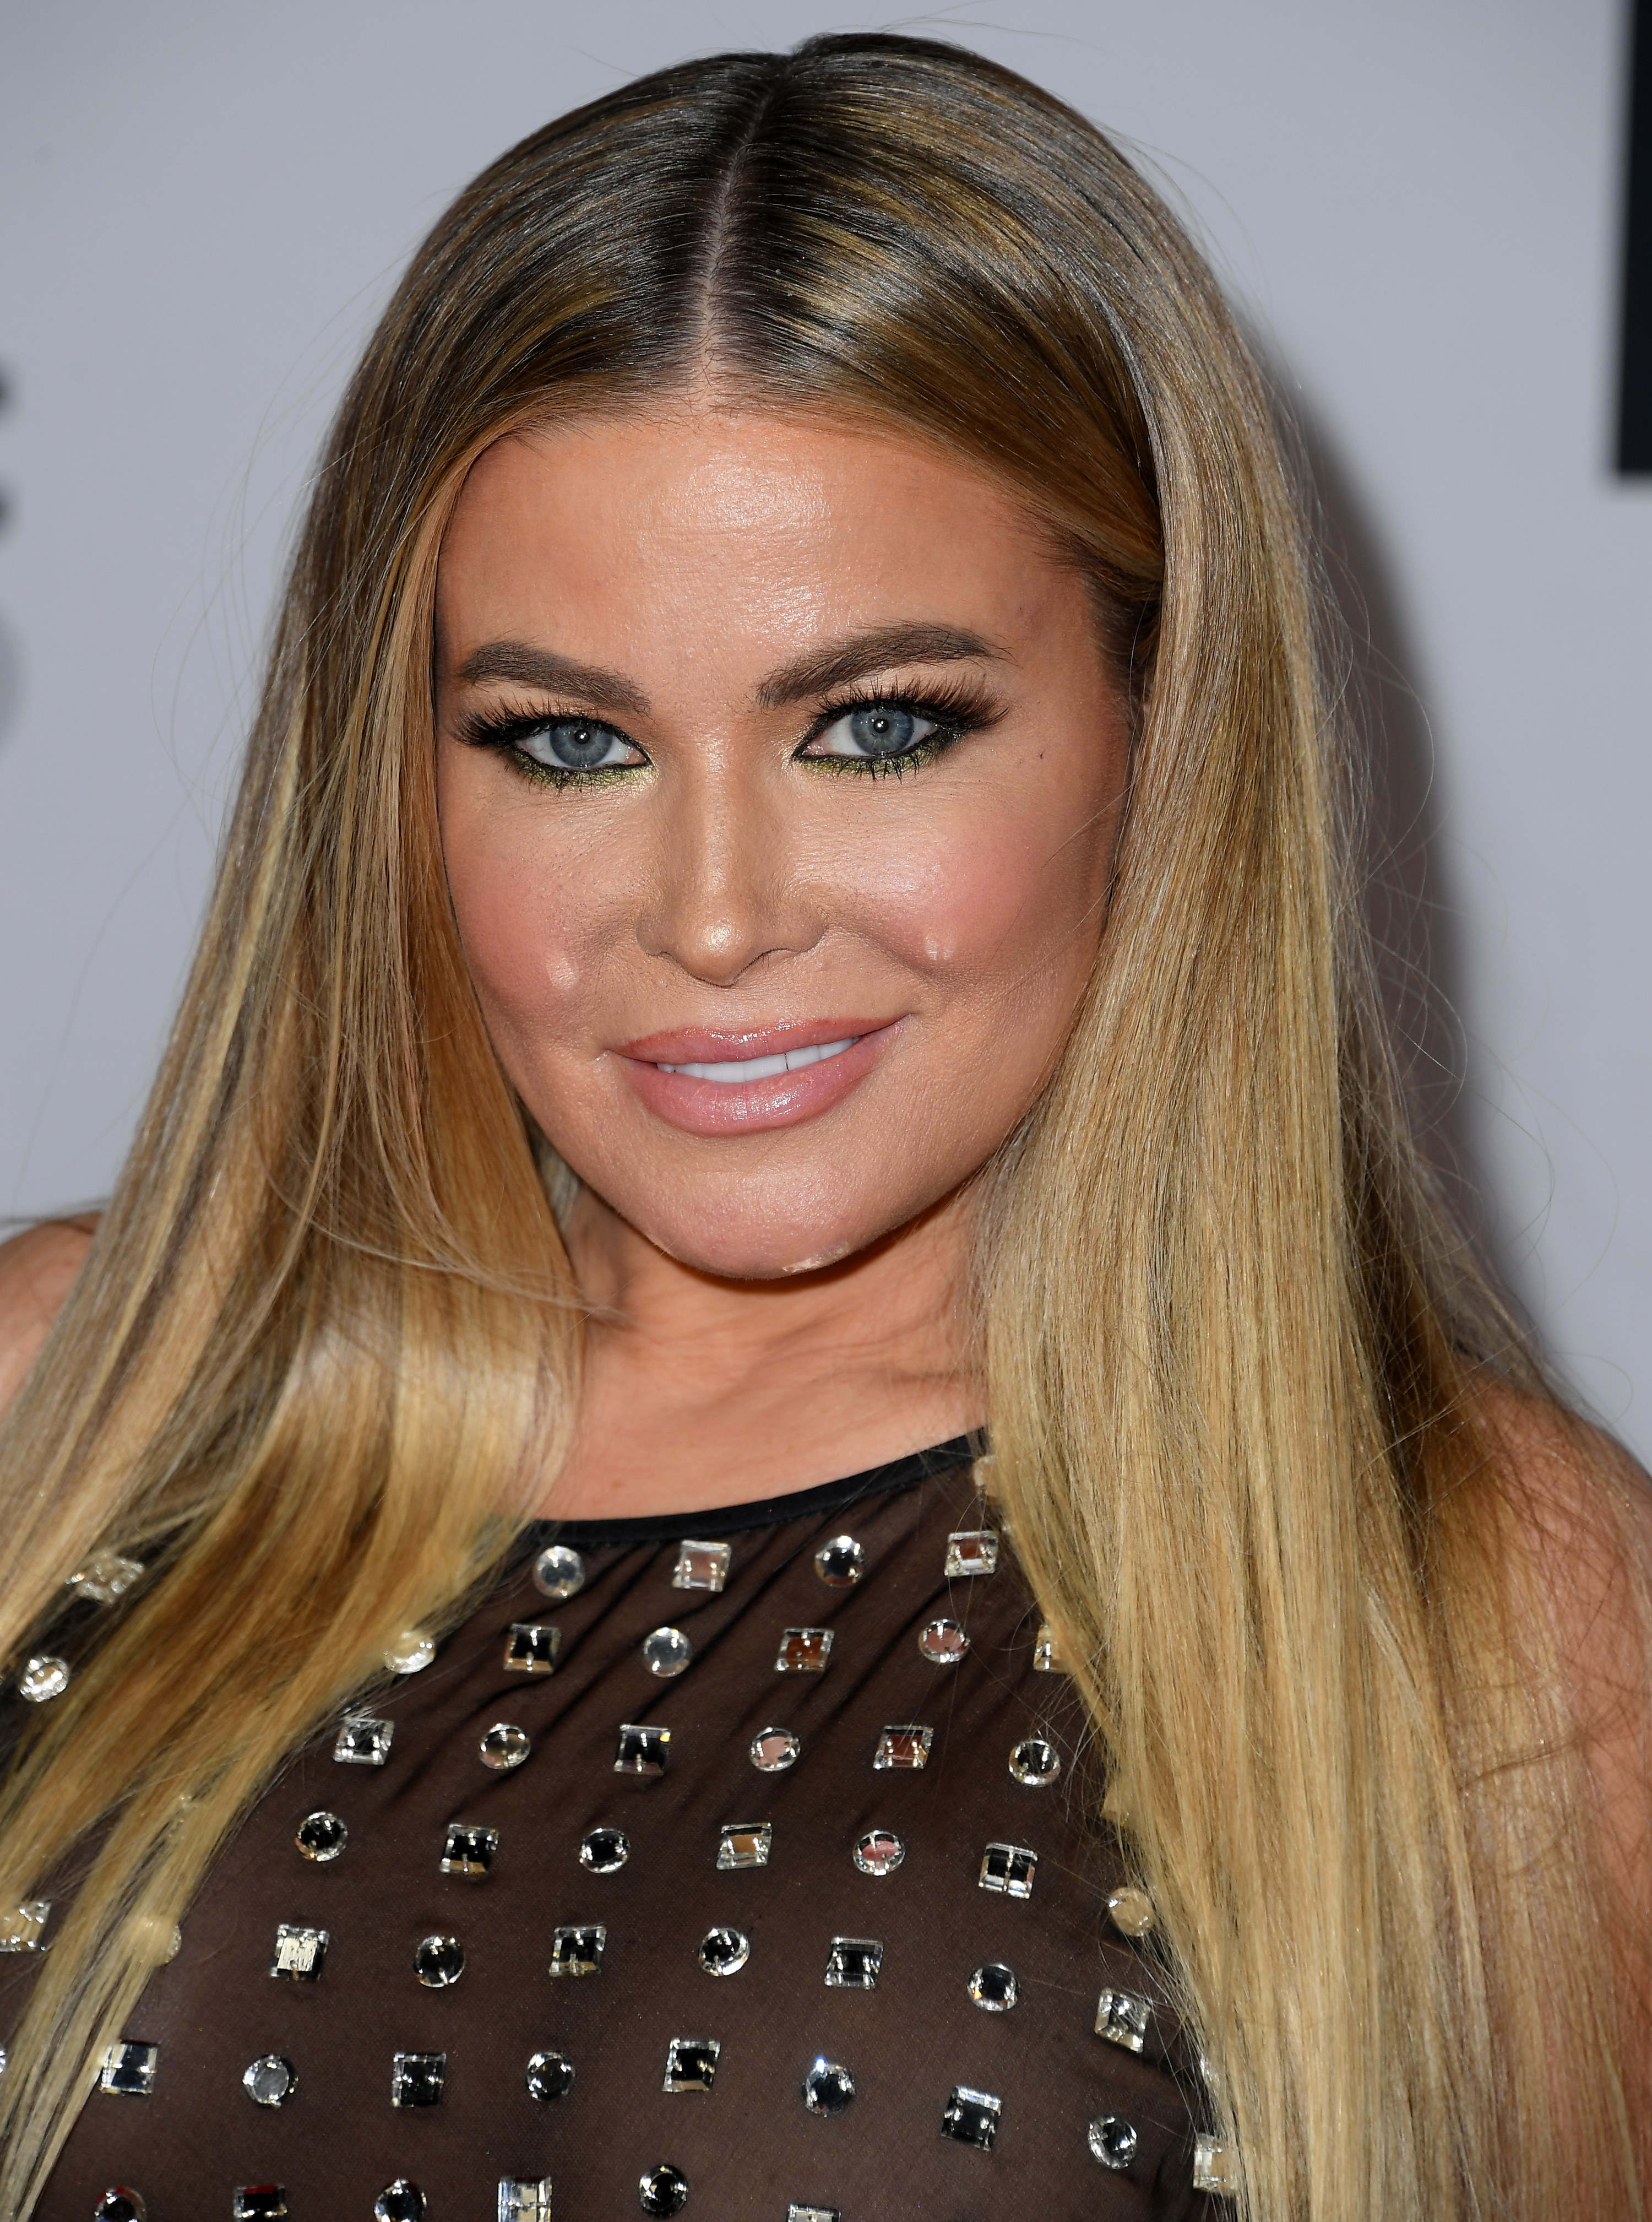 Carmen Electra poses at the iHeartRadio Music Awards on March 22, 2022